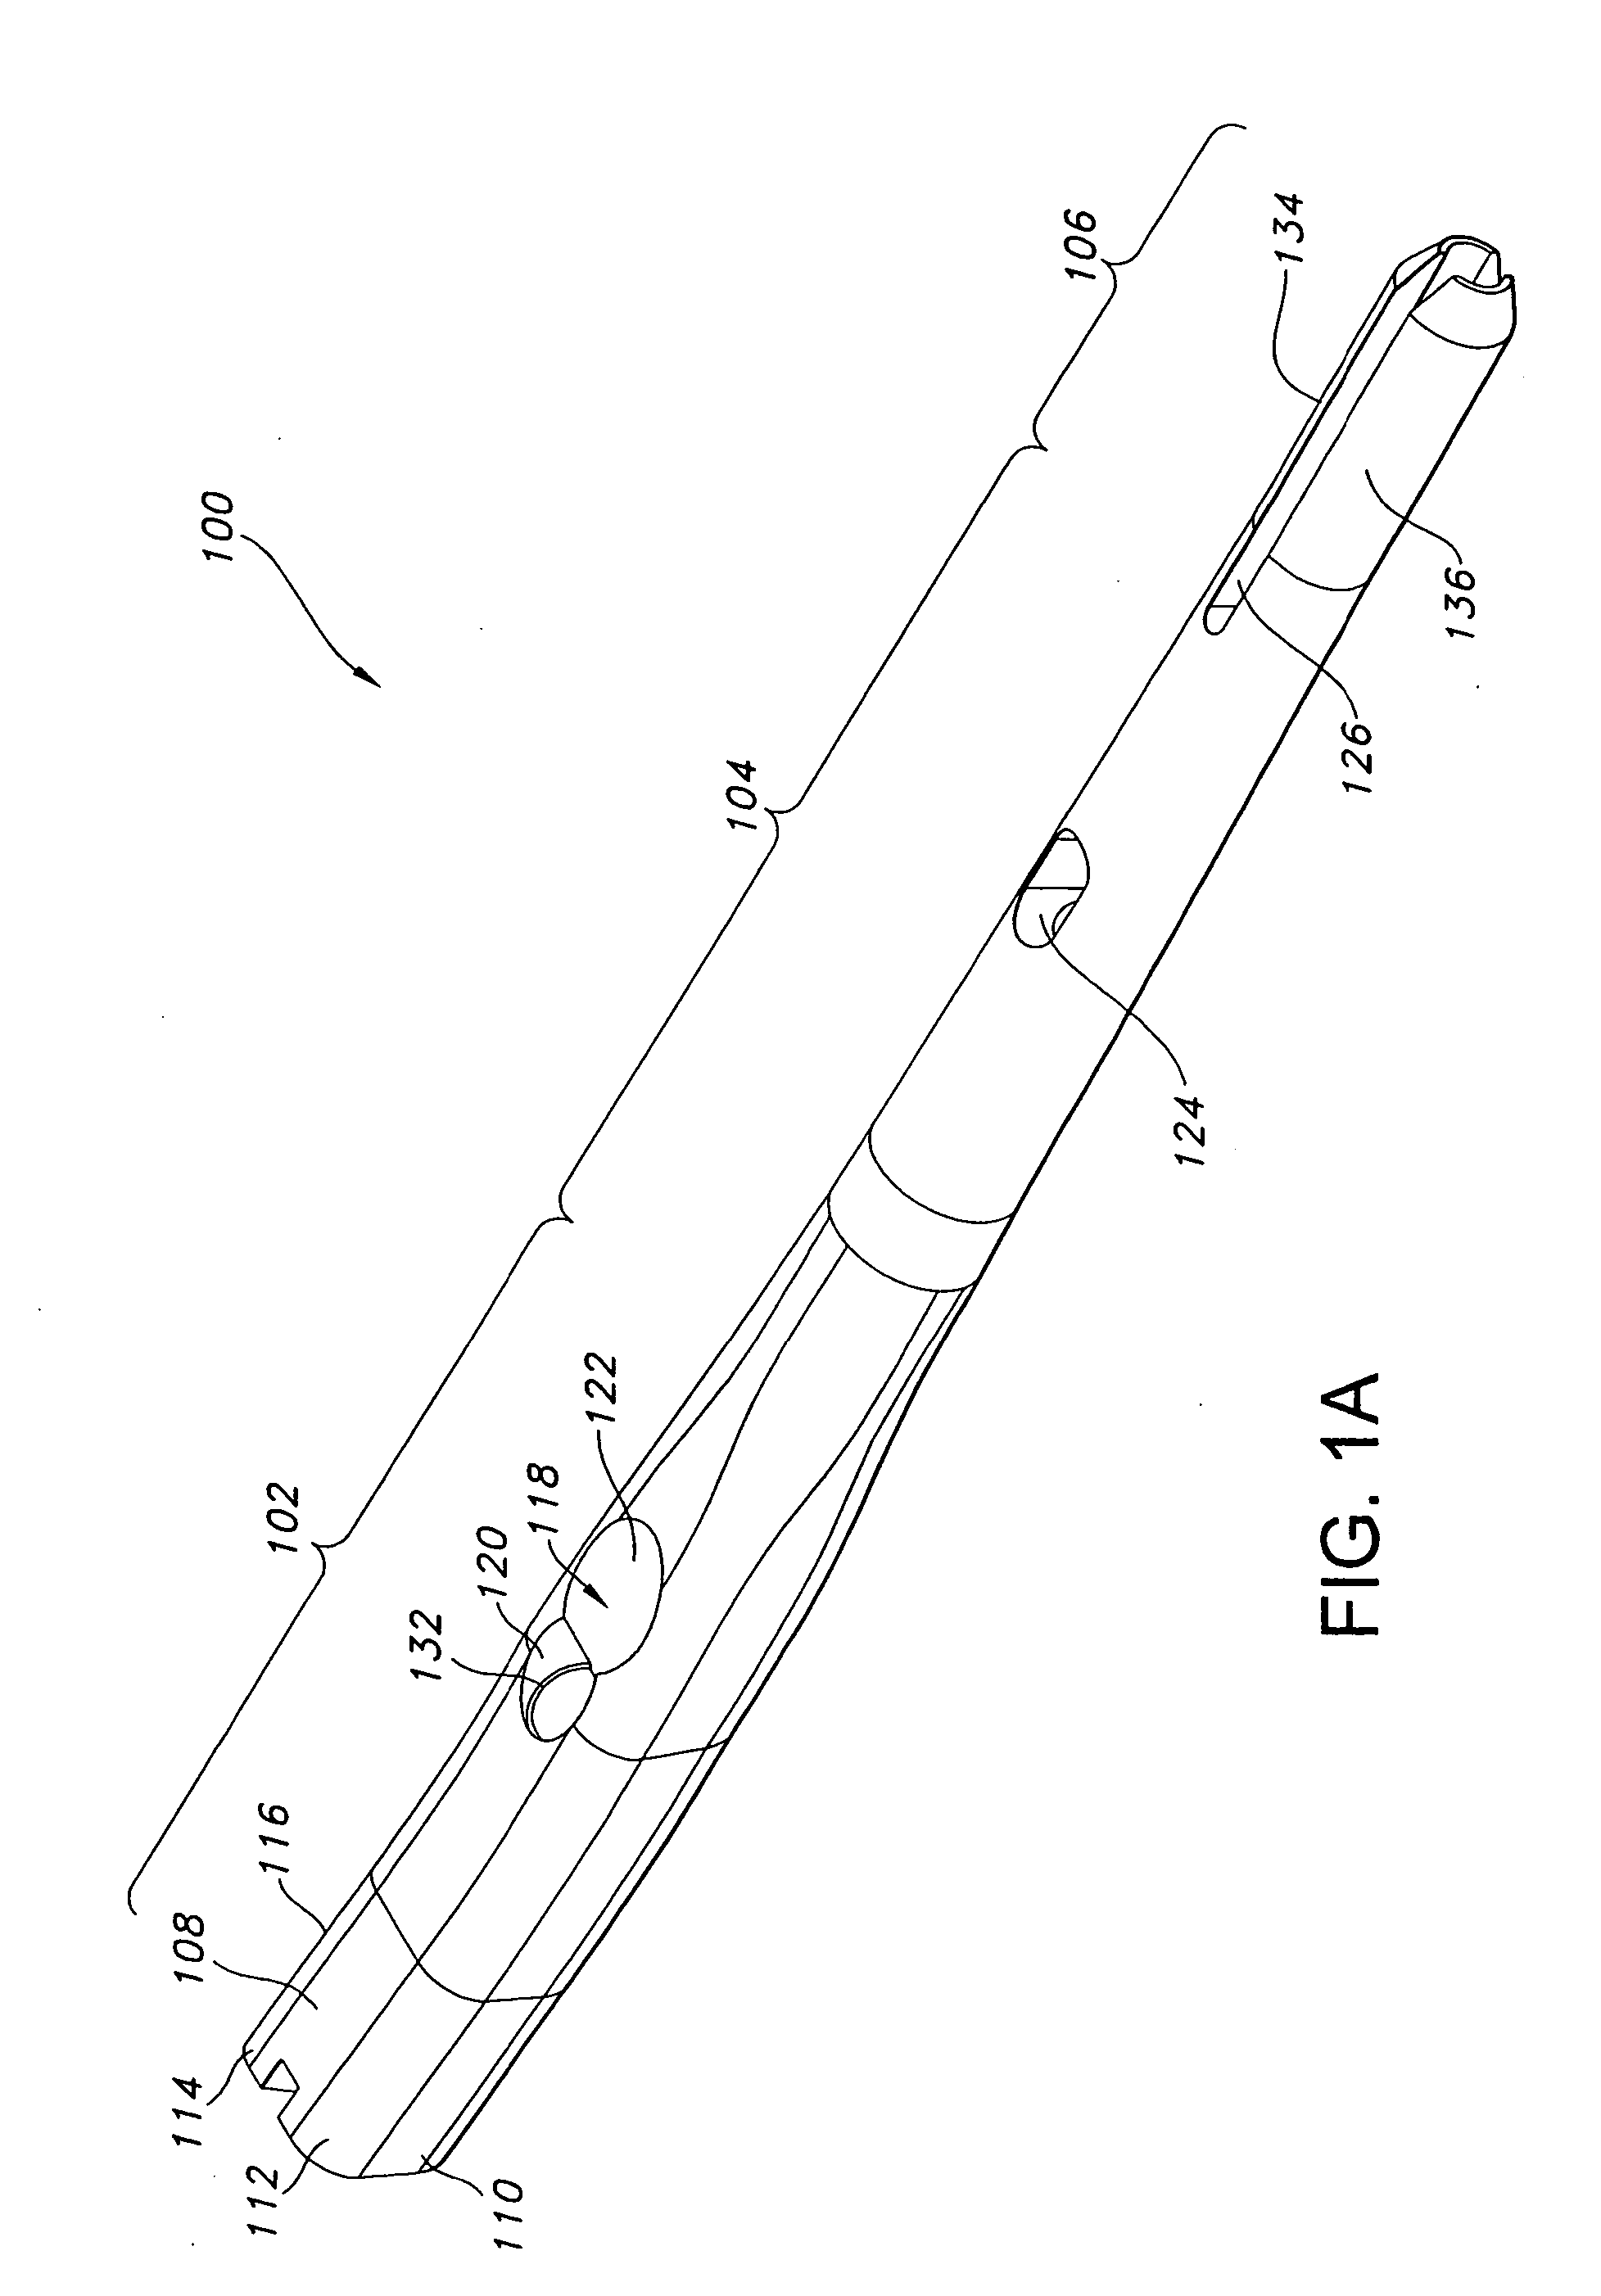 Orthopaedic plate and screw assembly